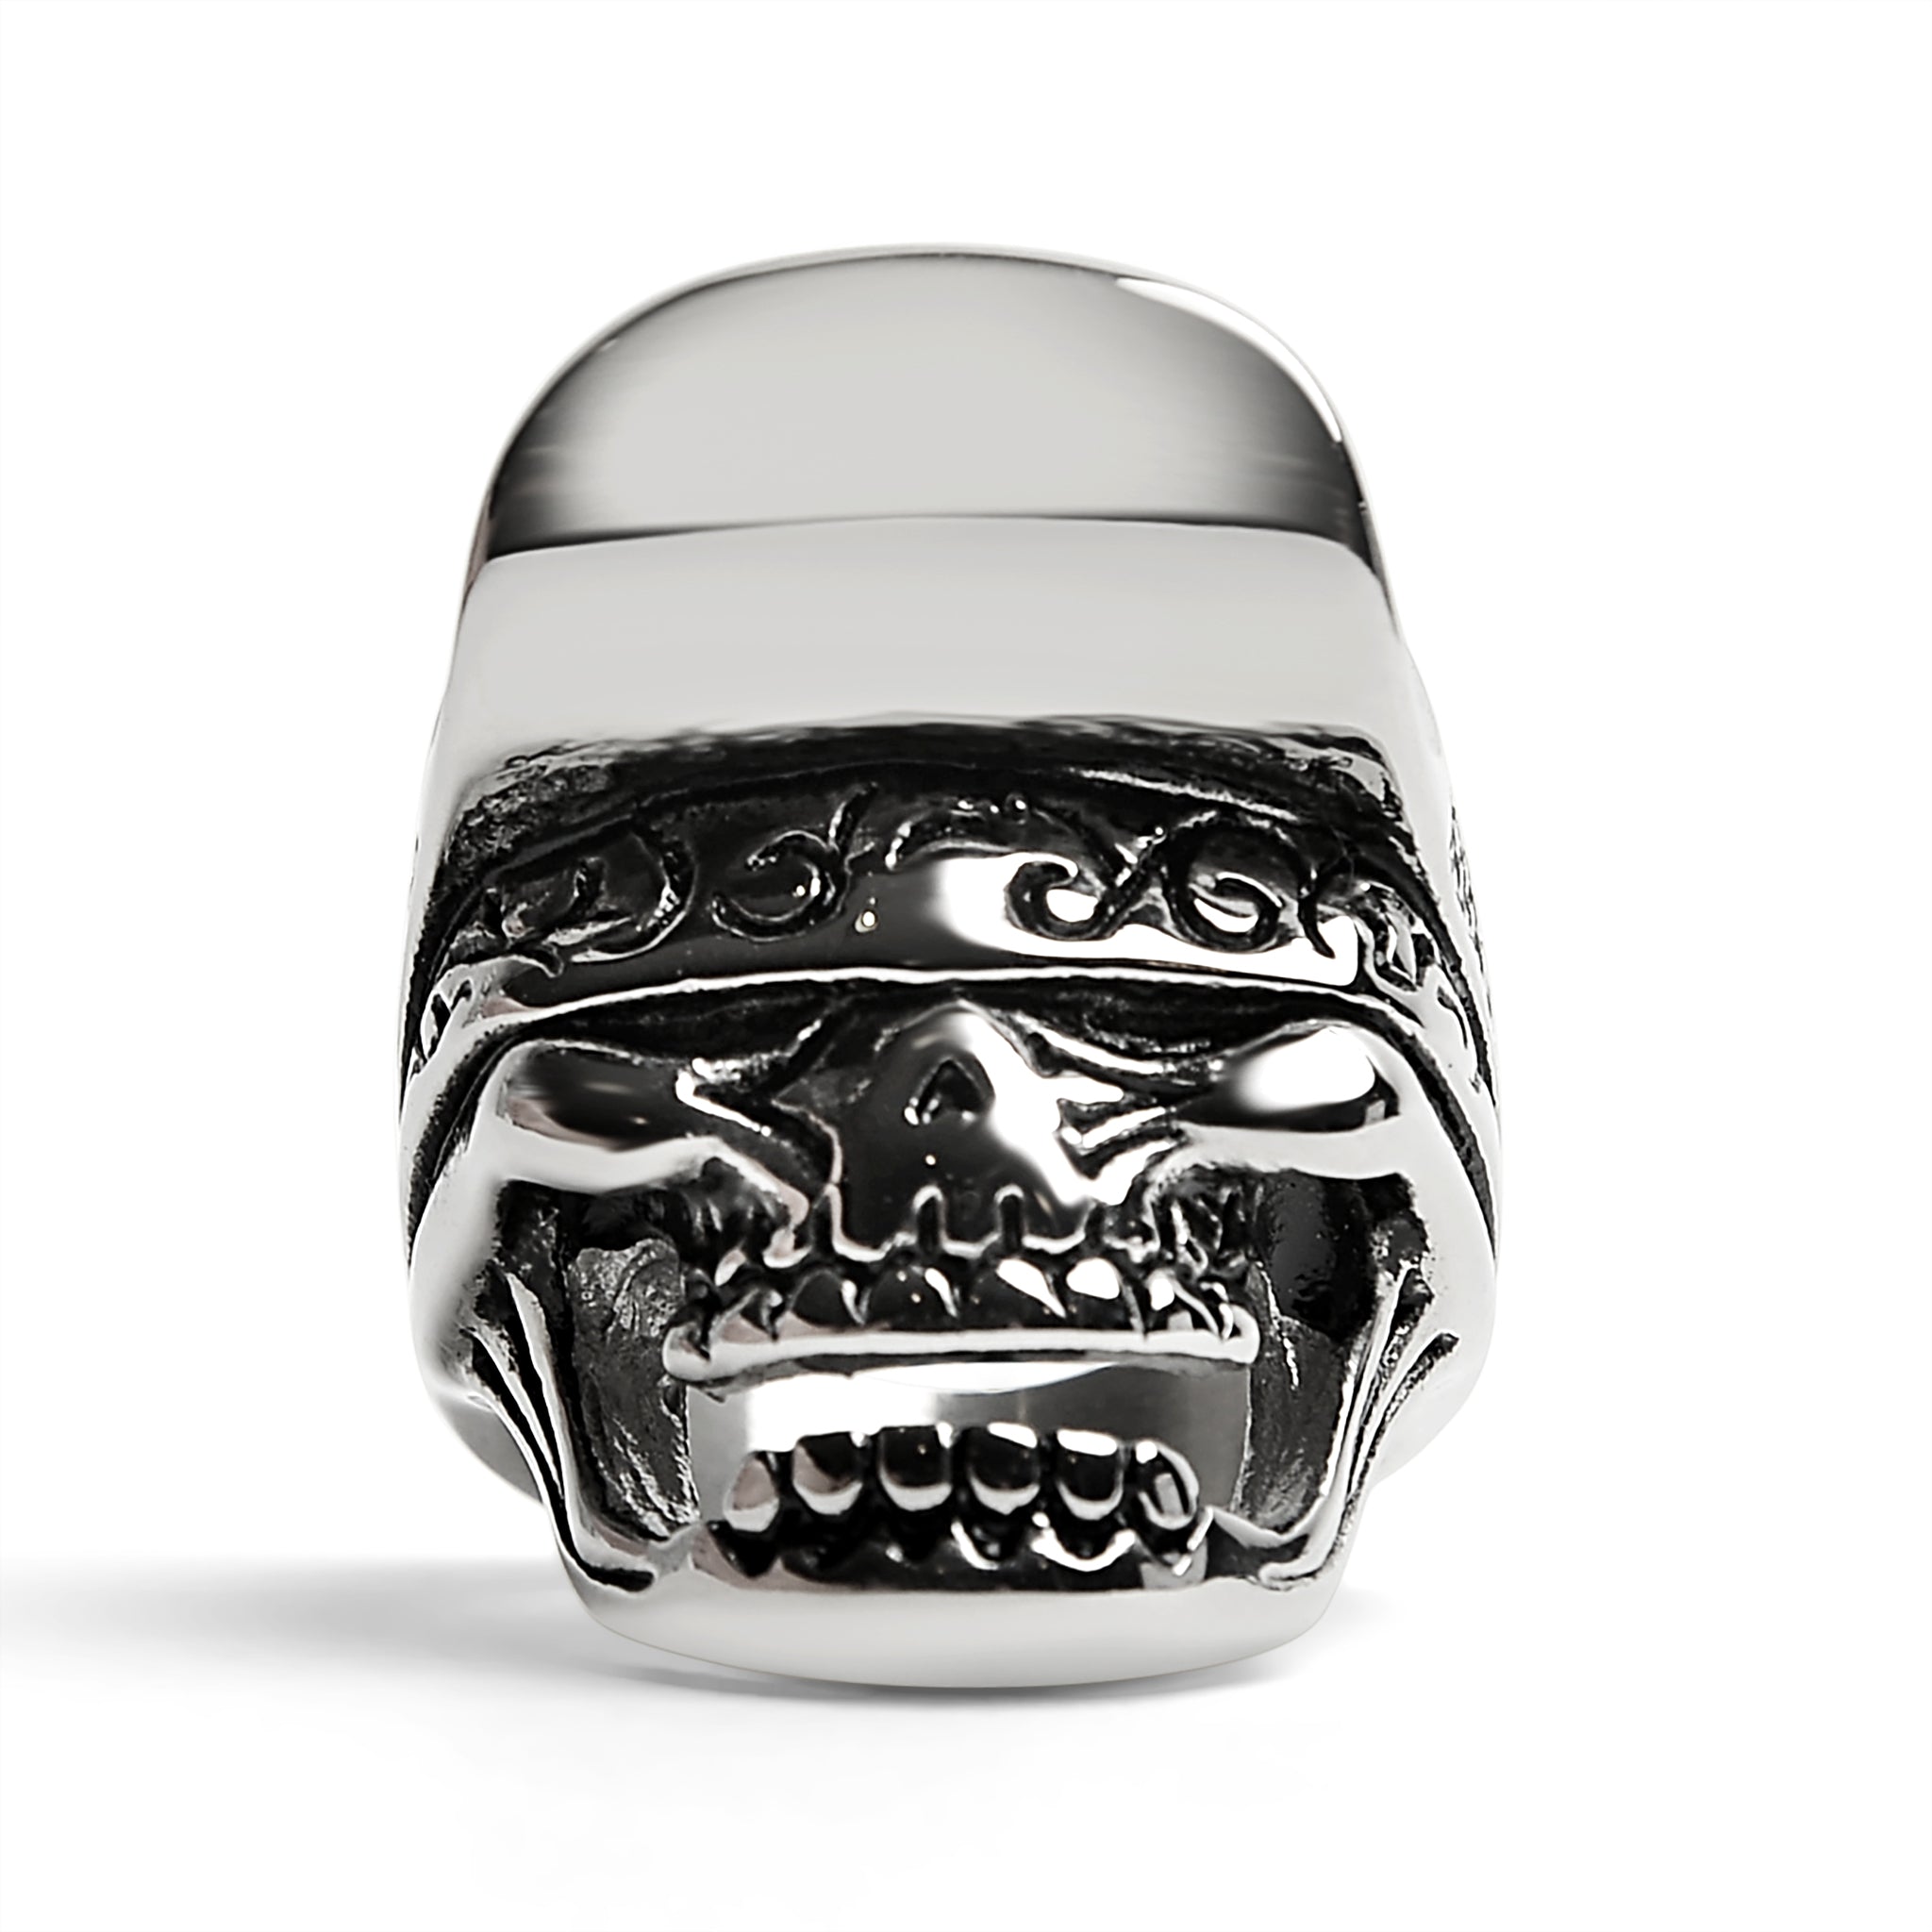 Stainless Steel Skull Ring for Men - Durable and Hypoallergenic - Jewelry & Watches - Bijou Her -  -  - 